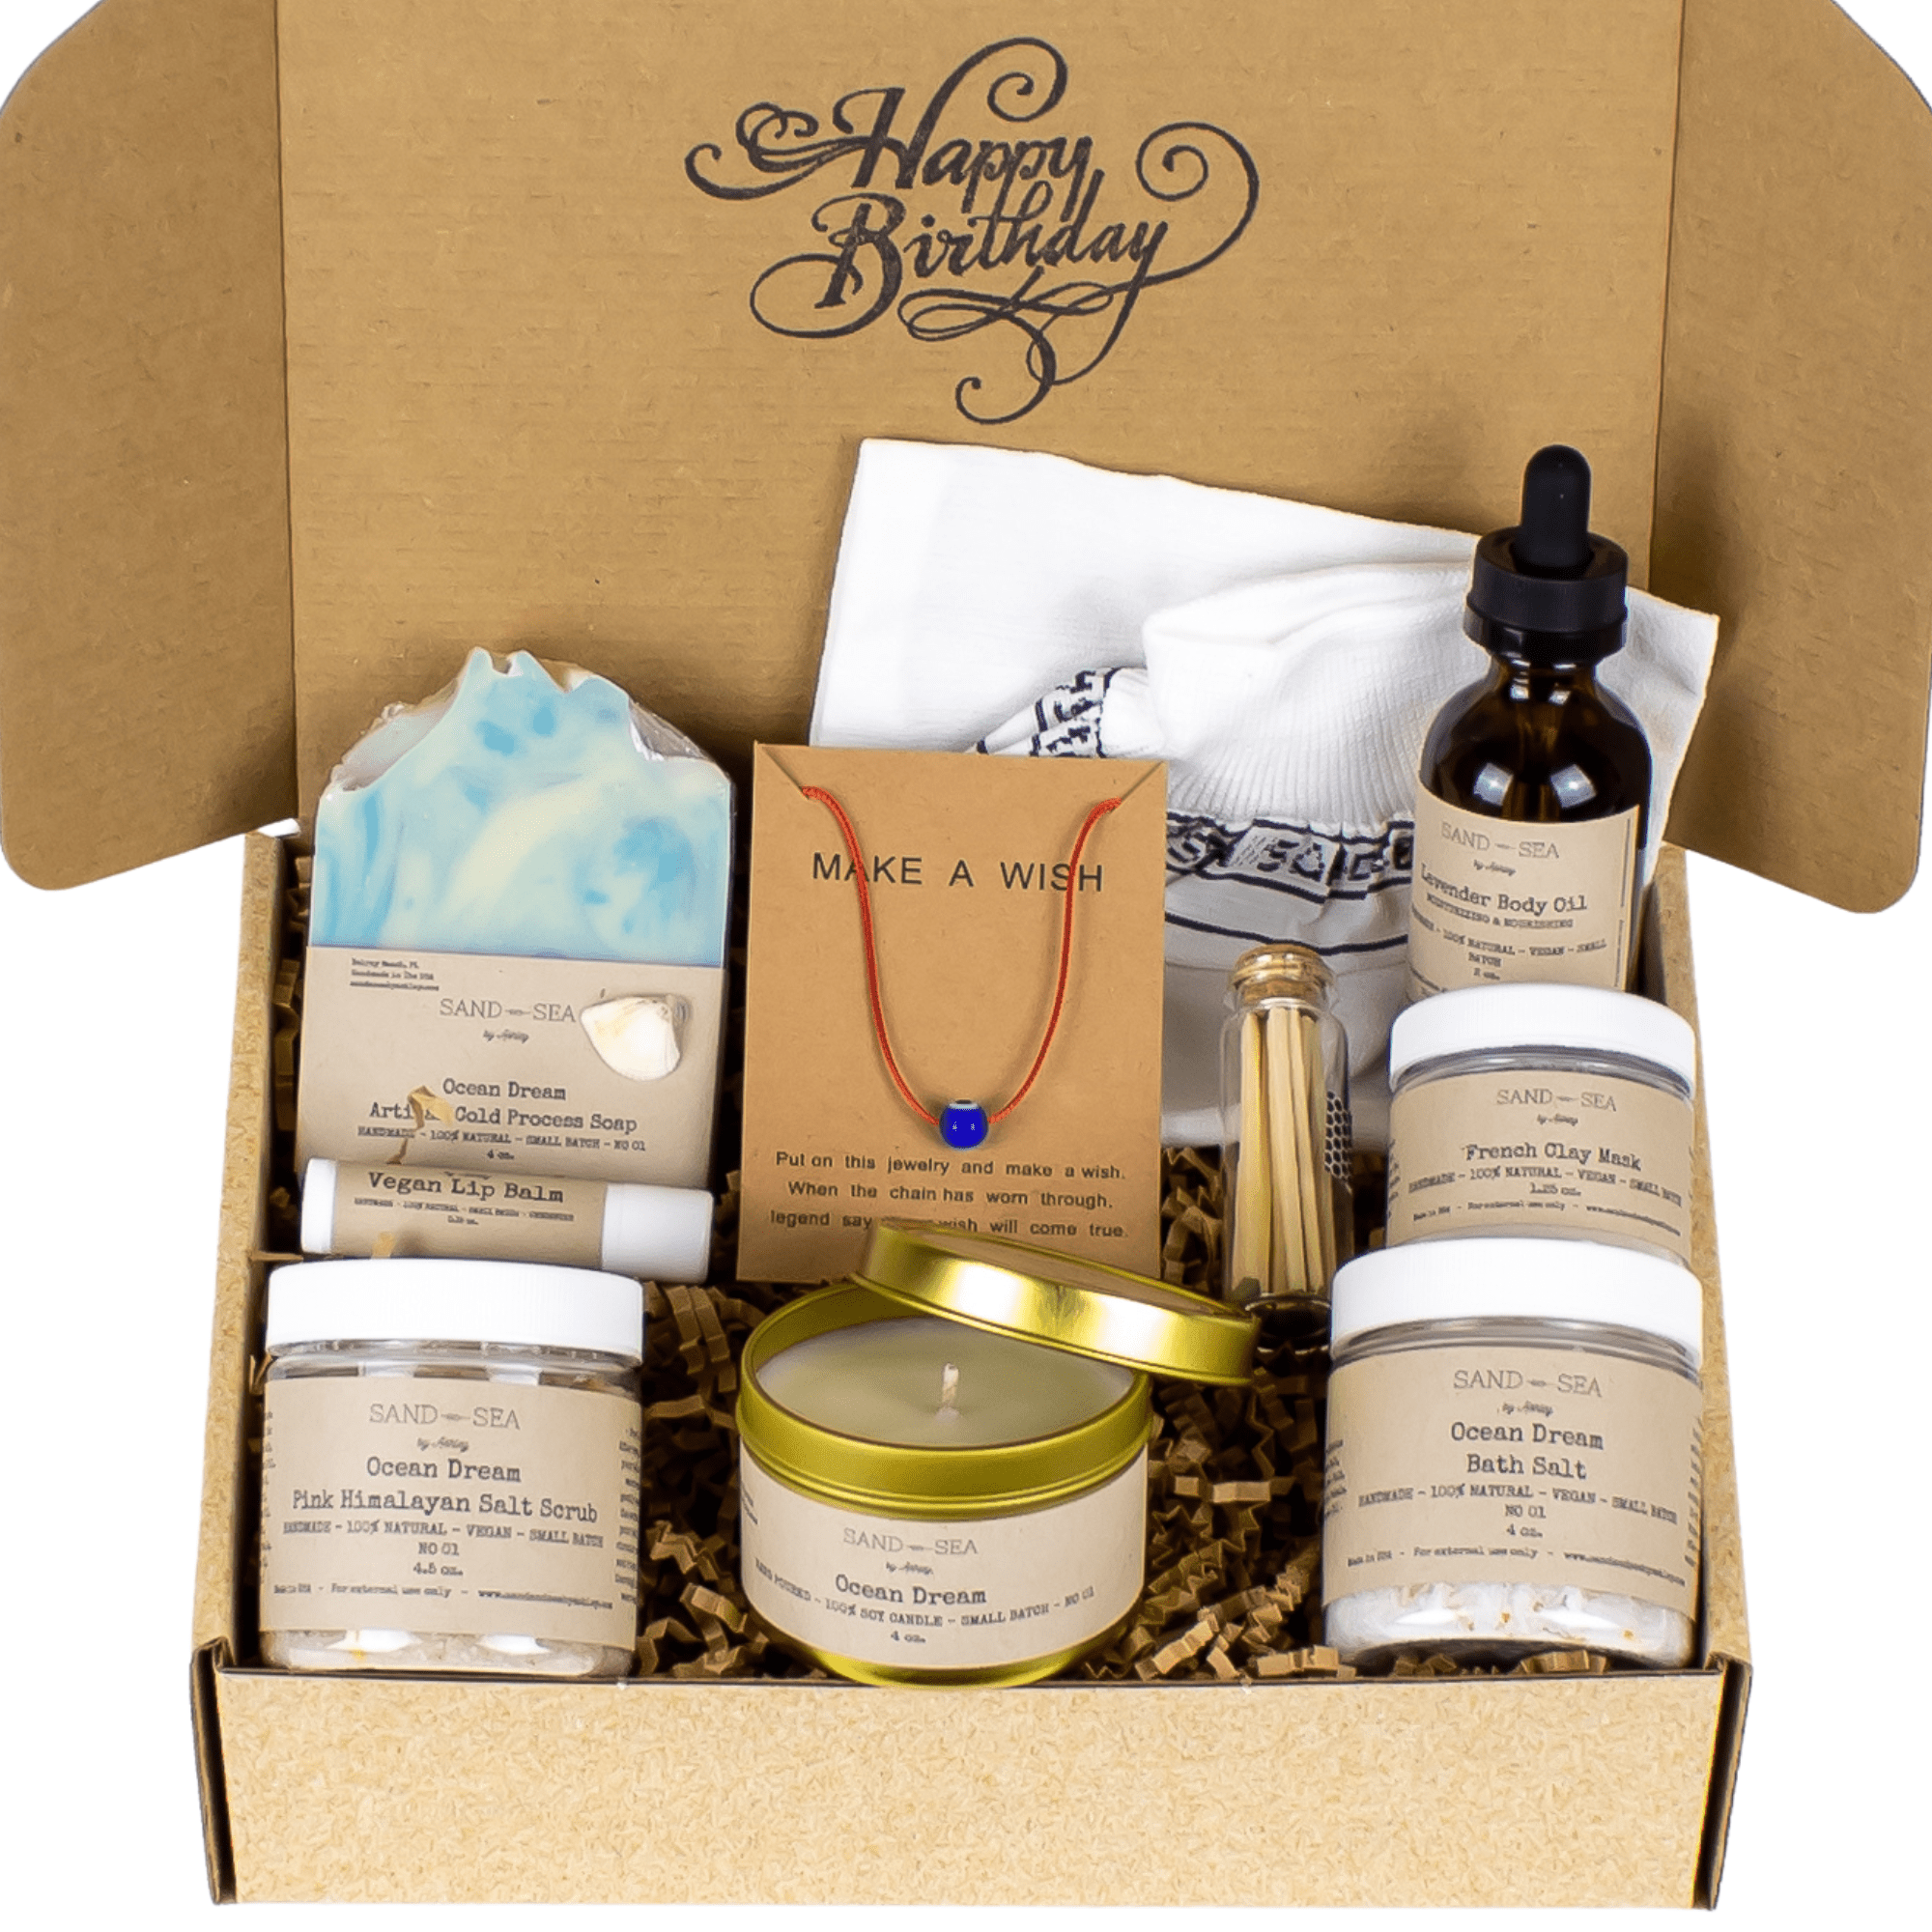 Spa Gift Set, Spa Gift Box, Spa Gift, Bath Set for Her, Birthday Spa Gift,  Gift for Her, Relaxation gifts, Birthday Gift, Gift for Mom by Naturally  Gifted